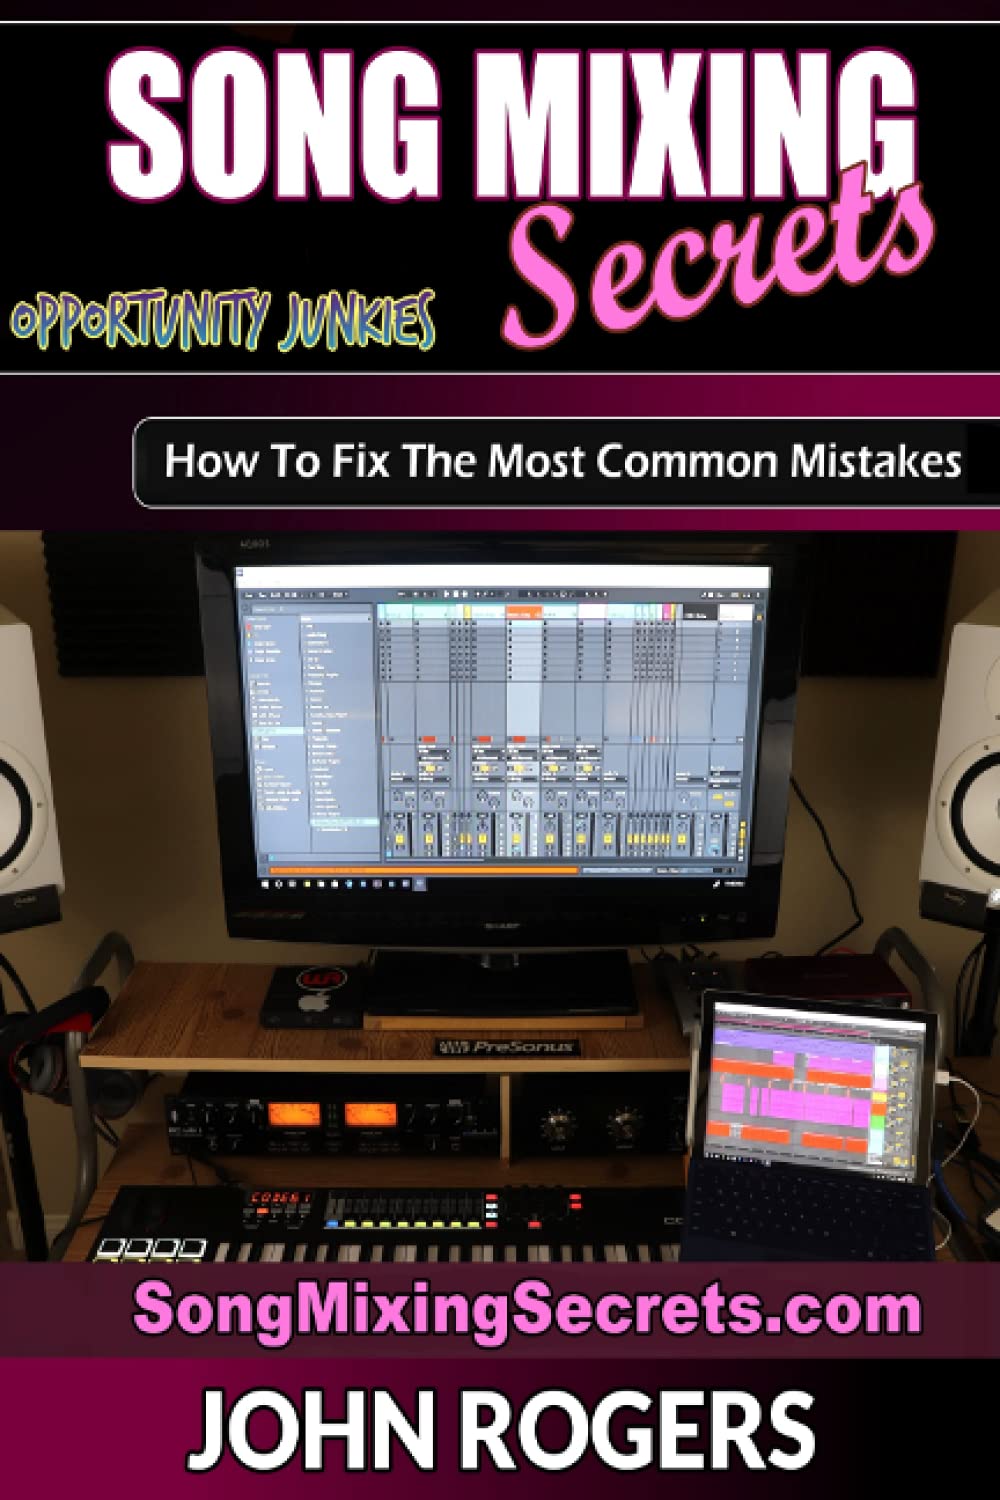 Song Mixing Secrets - How To Fix The Most Common Mistakes